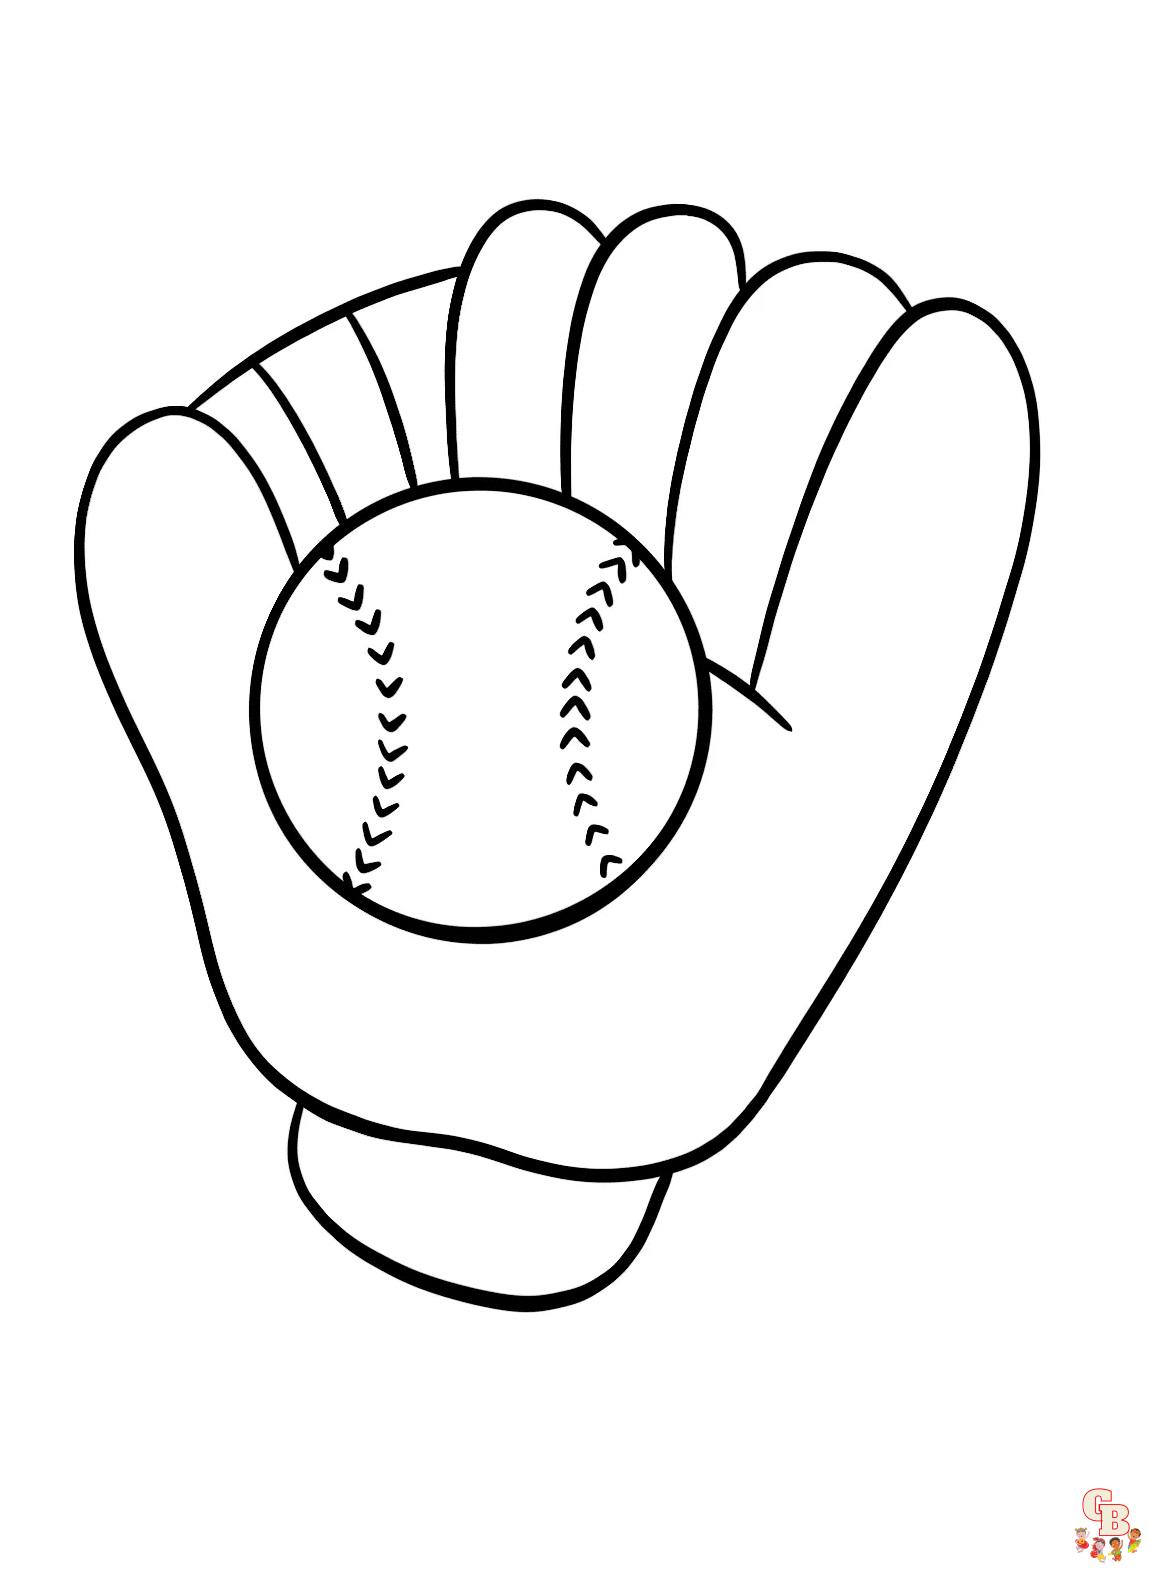 Score a home run with softball coloring pages